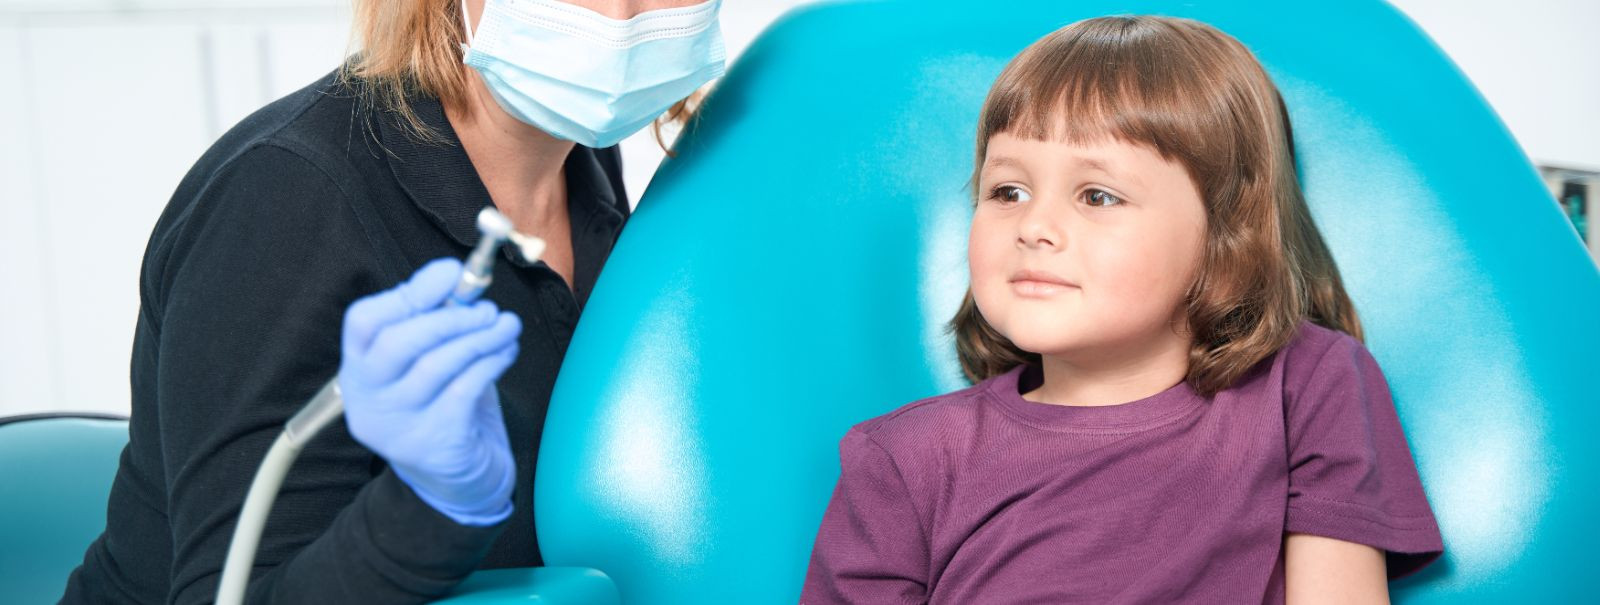 Introducing your child to dental care early on is crucial for establishing a foundation for a lifetime of healthy oral habits. The first dental visit is a signi